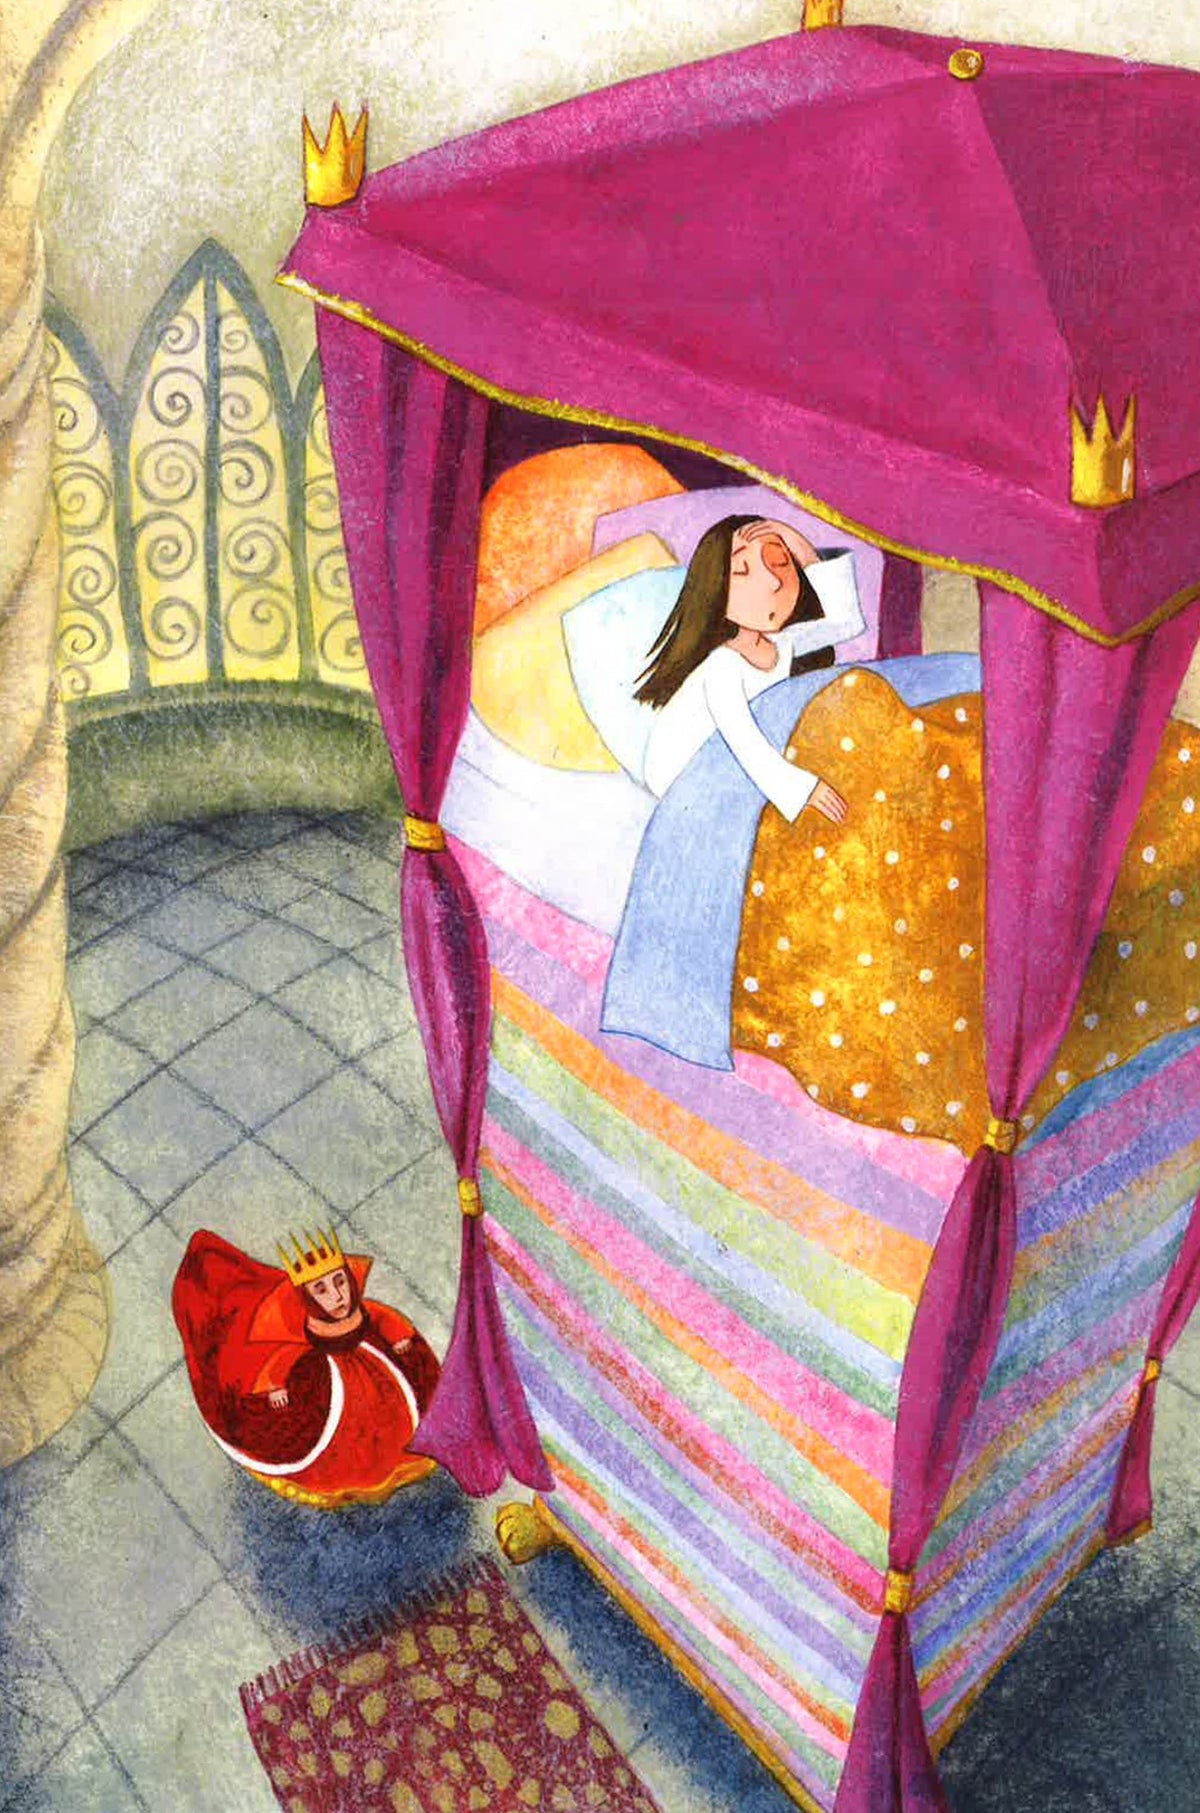 the princess and the pea by hans christian andersen